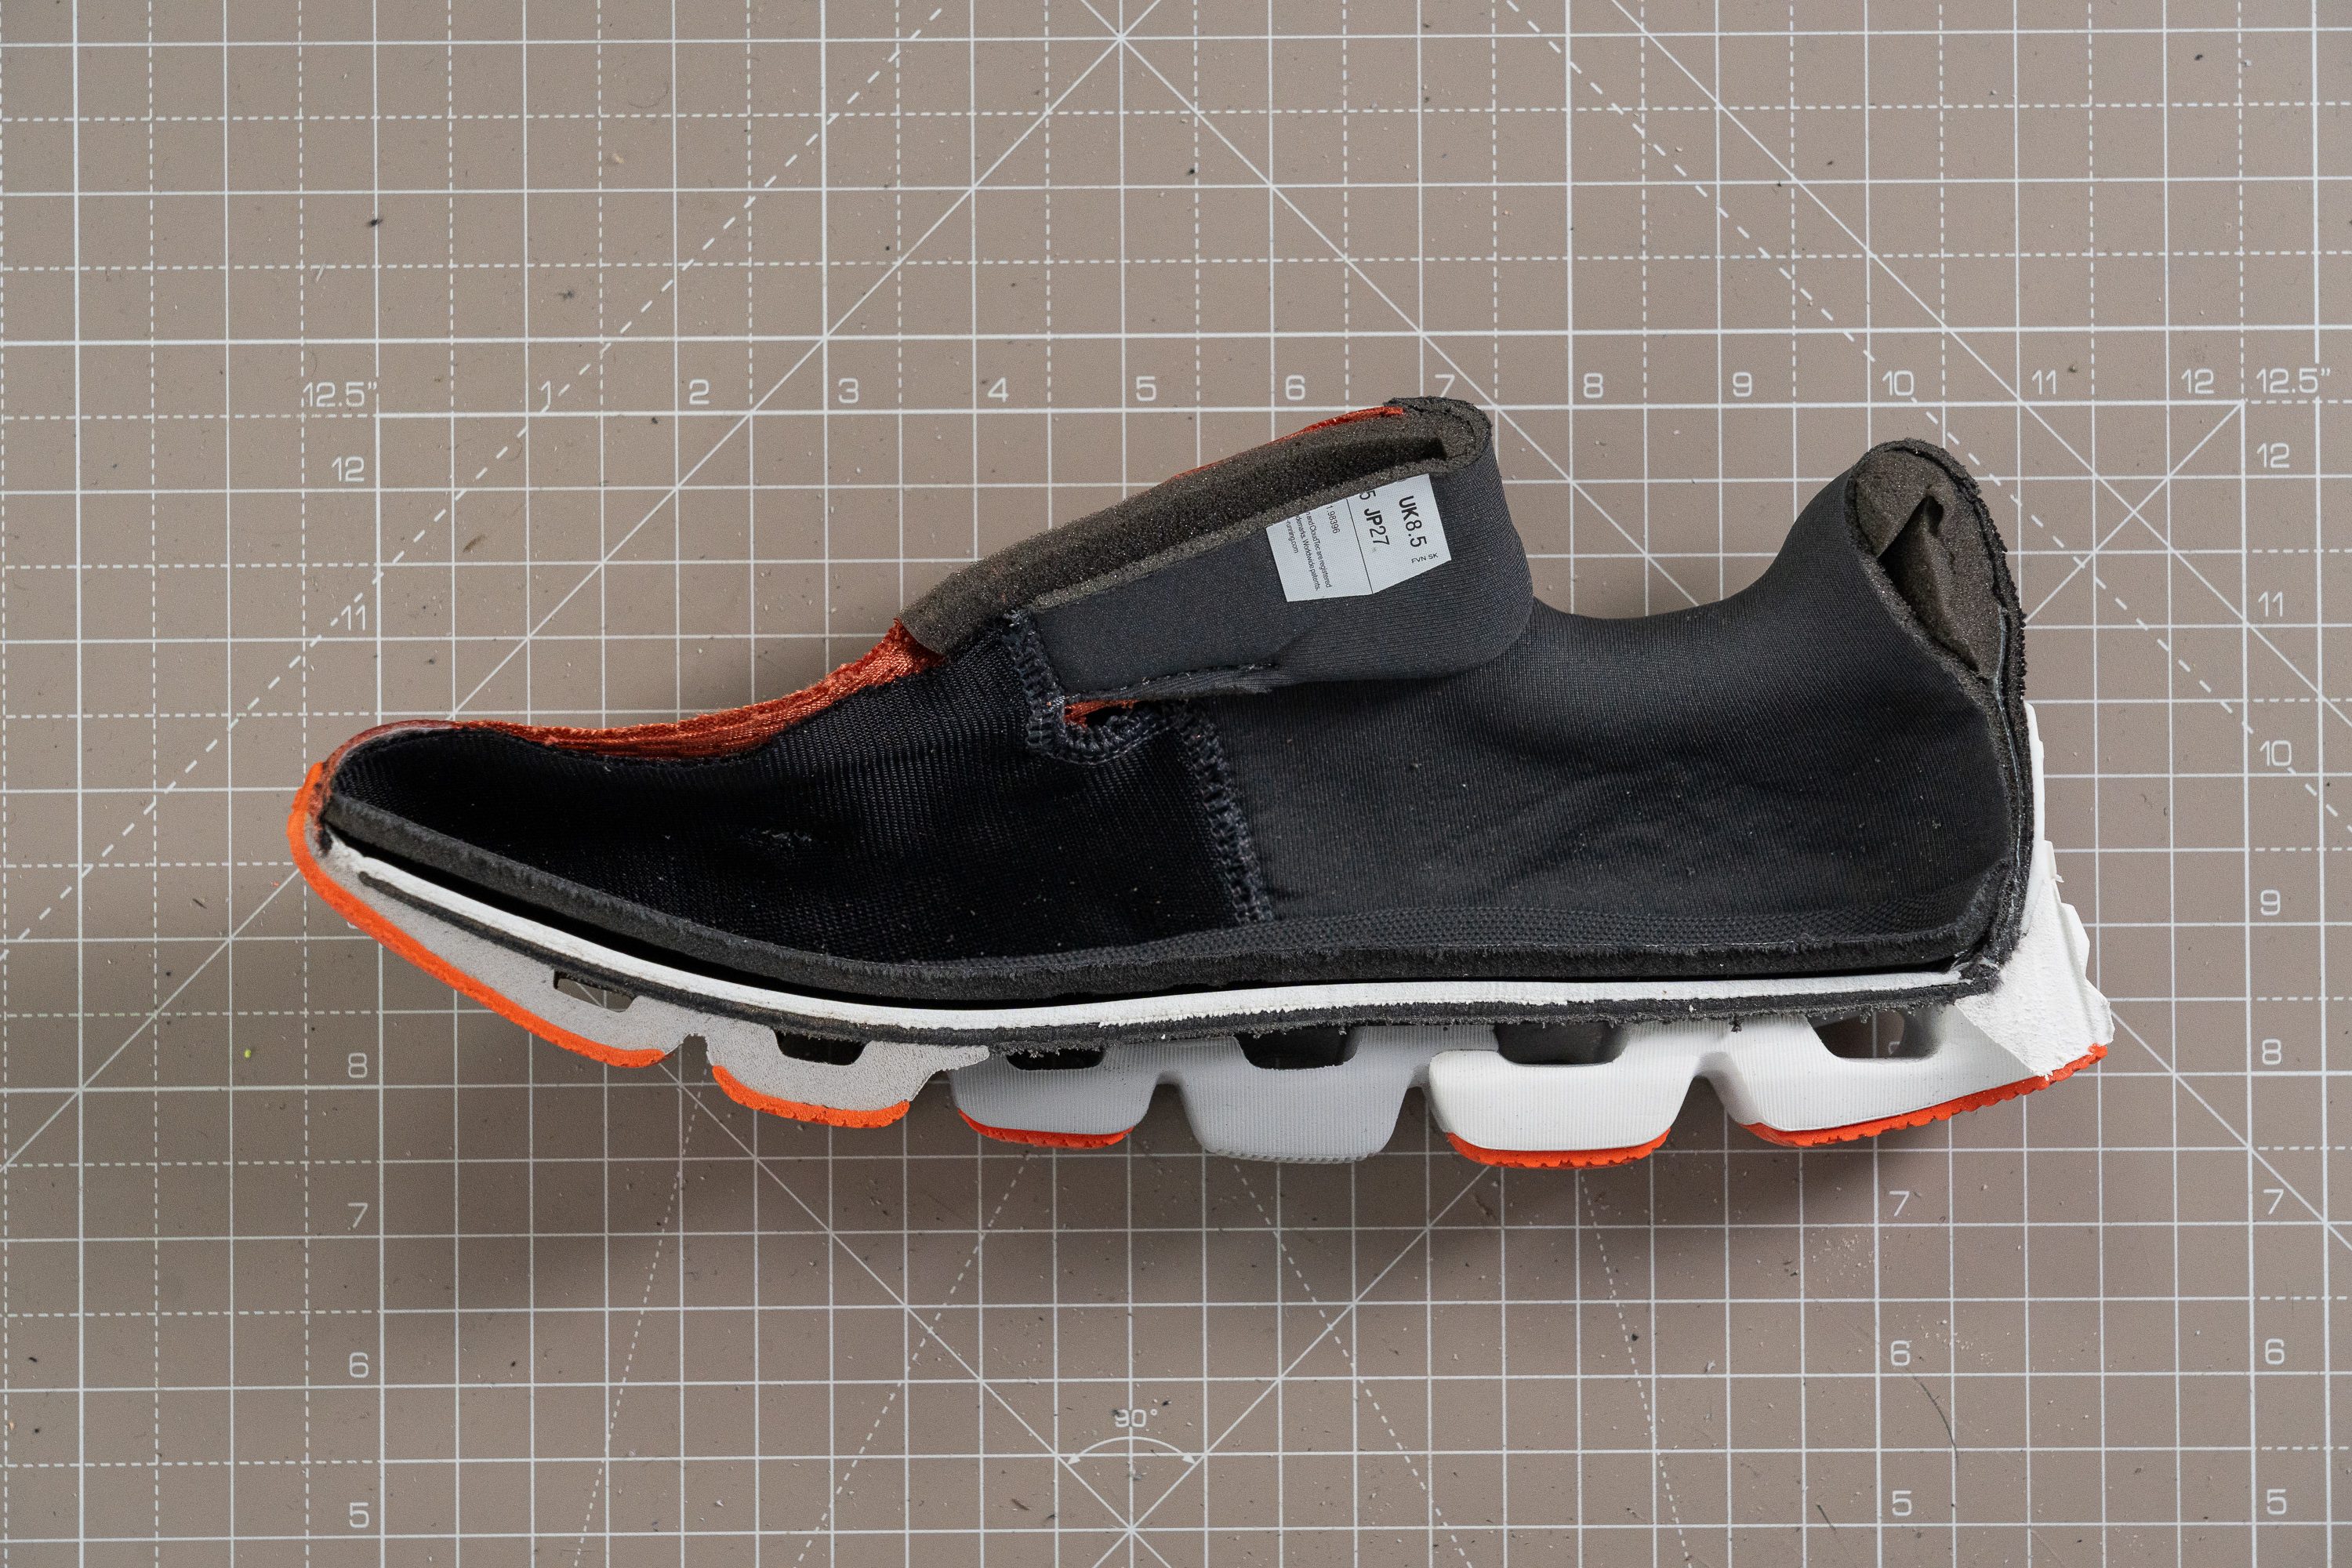 held up, we thought this shoe would be great for solid durability Drop